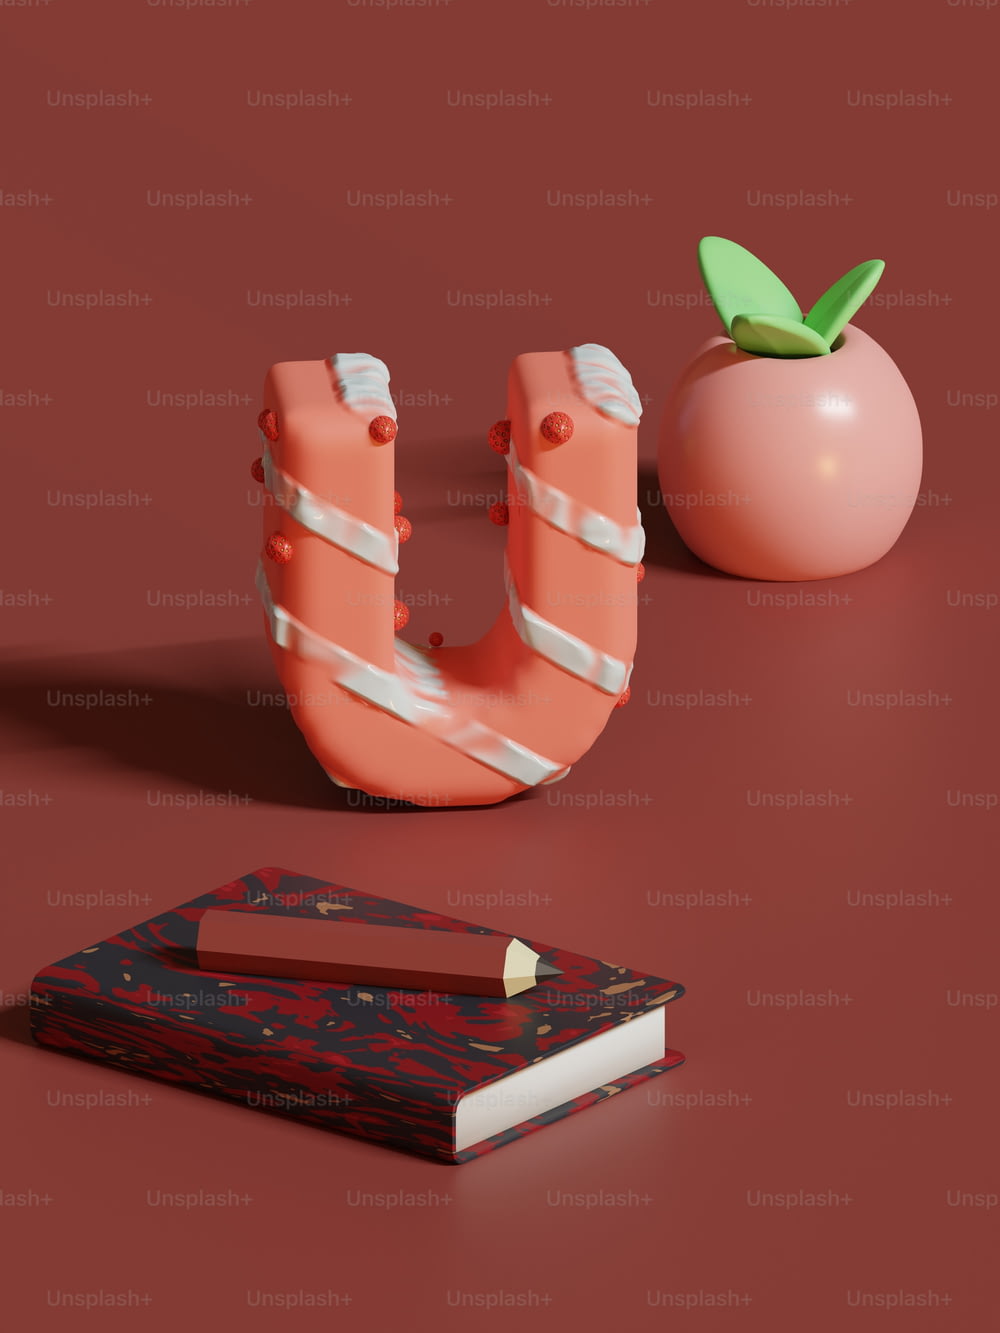 a book, a tomato, and a pair of scissors on a red surface